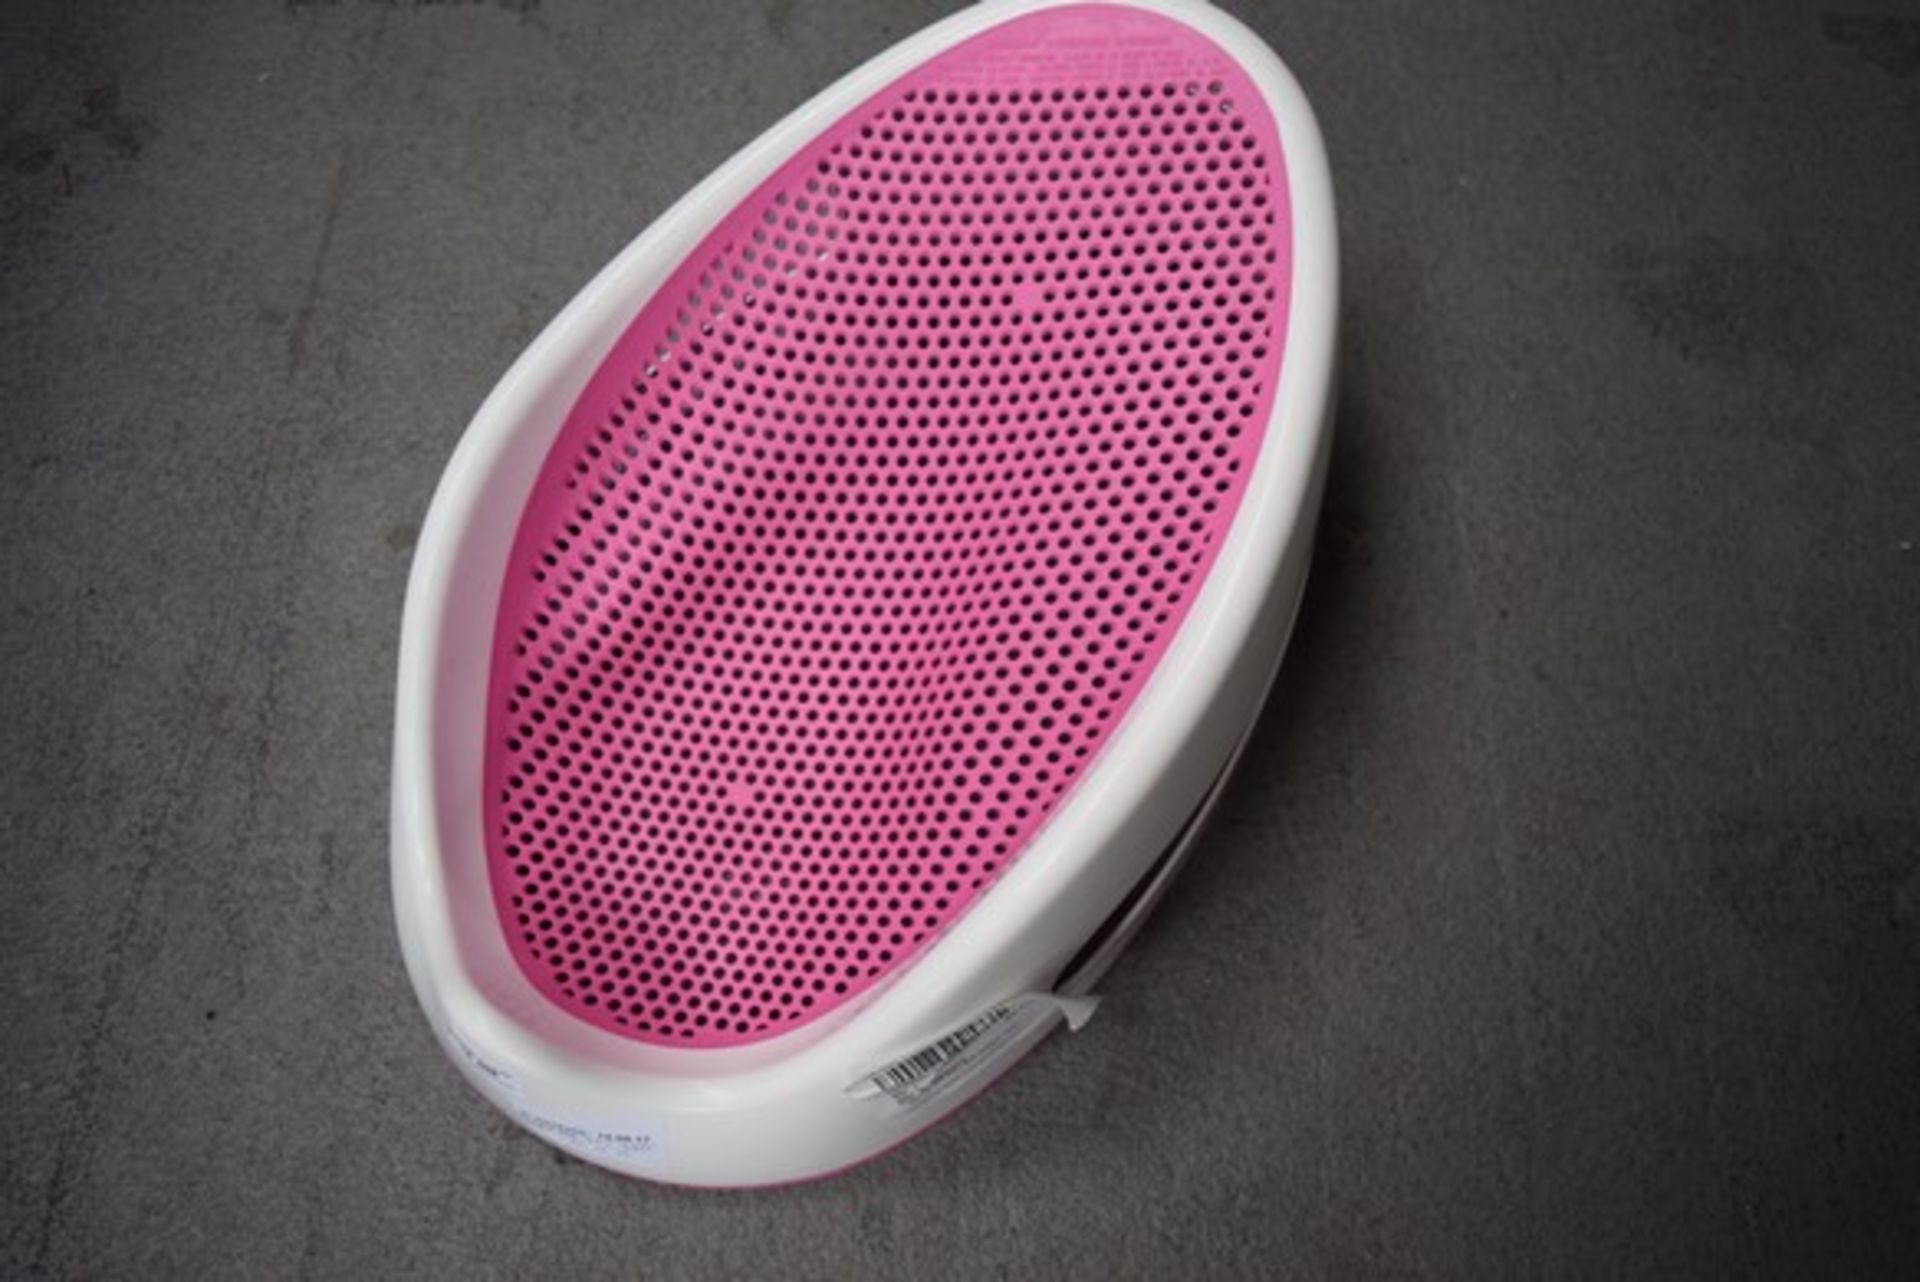 1 x ANGEL CARE SOFT BABY BATH SUPPORT IN PINK RRP £20 14.08.17 *PLEASE NOTE THAT THE BID PRICE IS